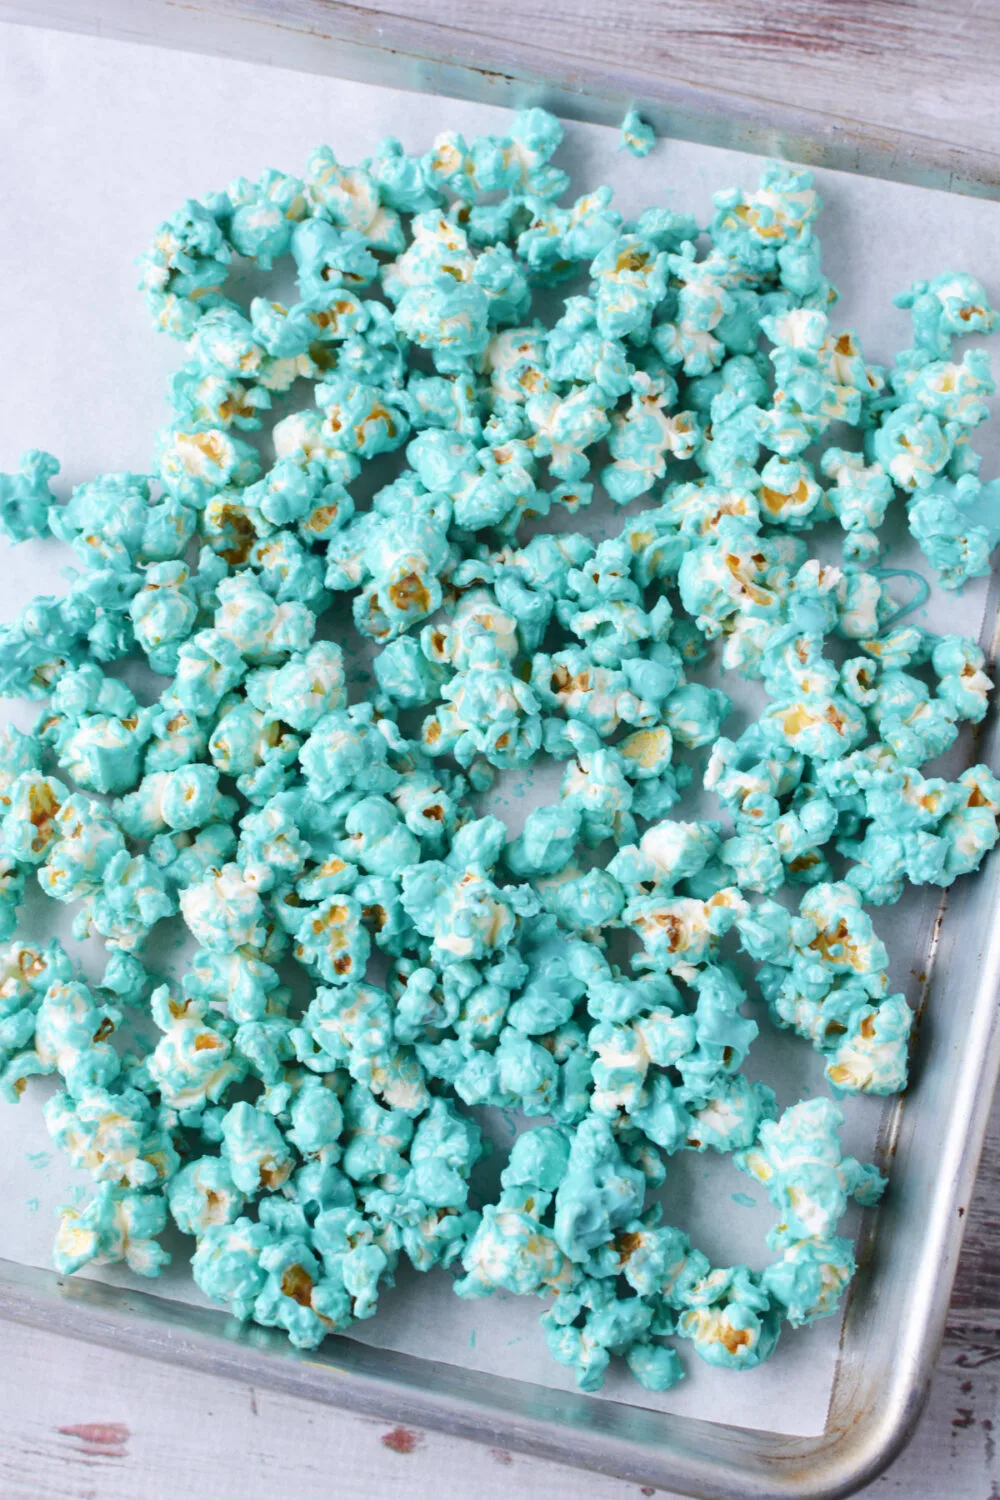 Candy coated blue popcorn on a baking sheet.